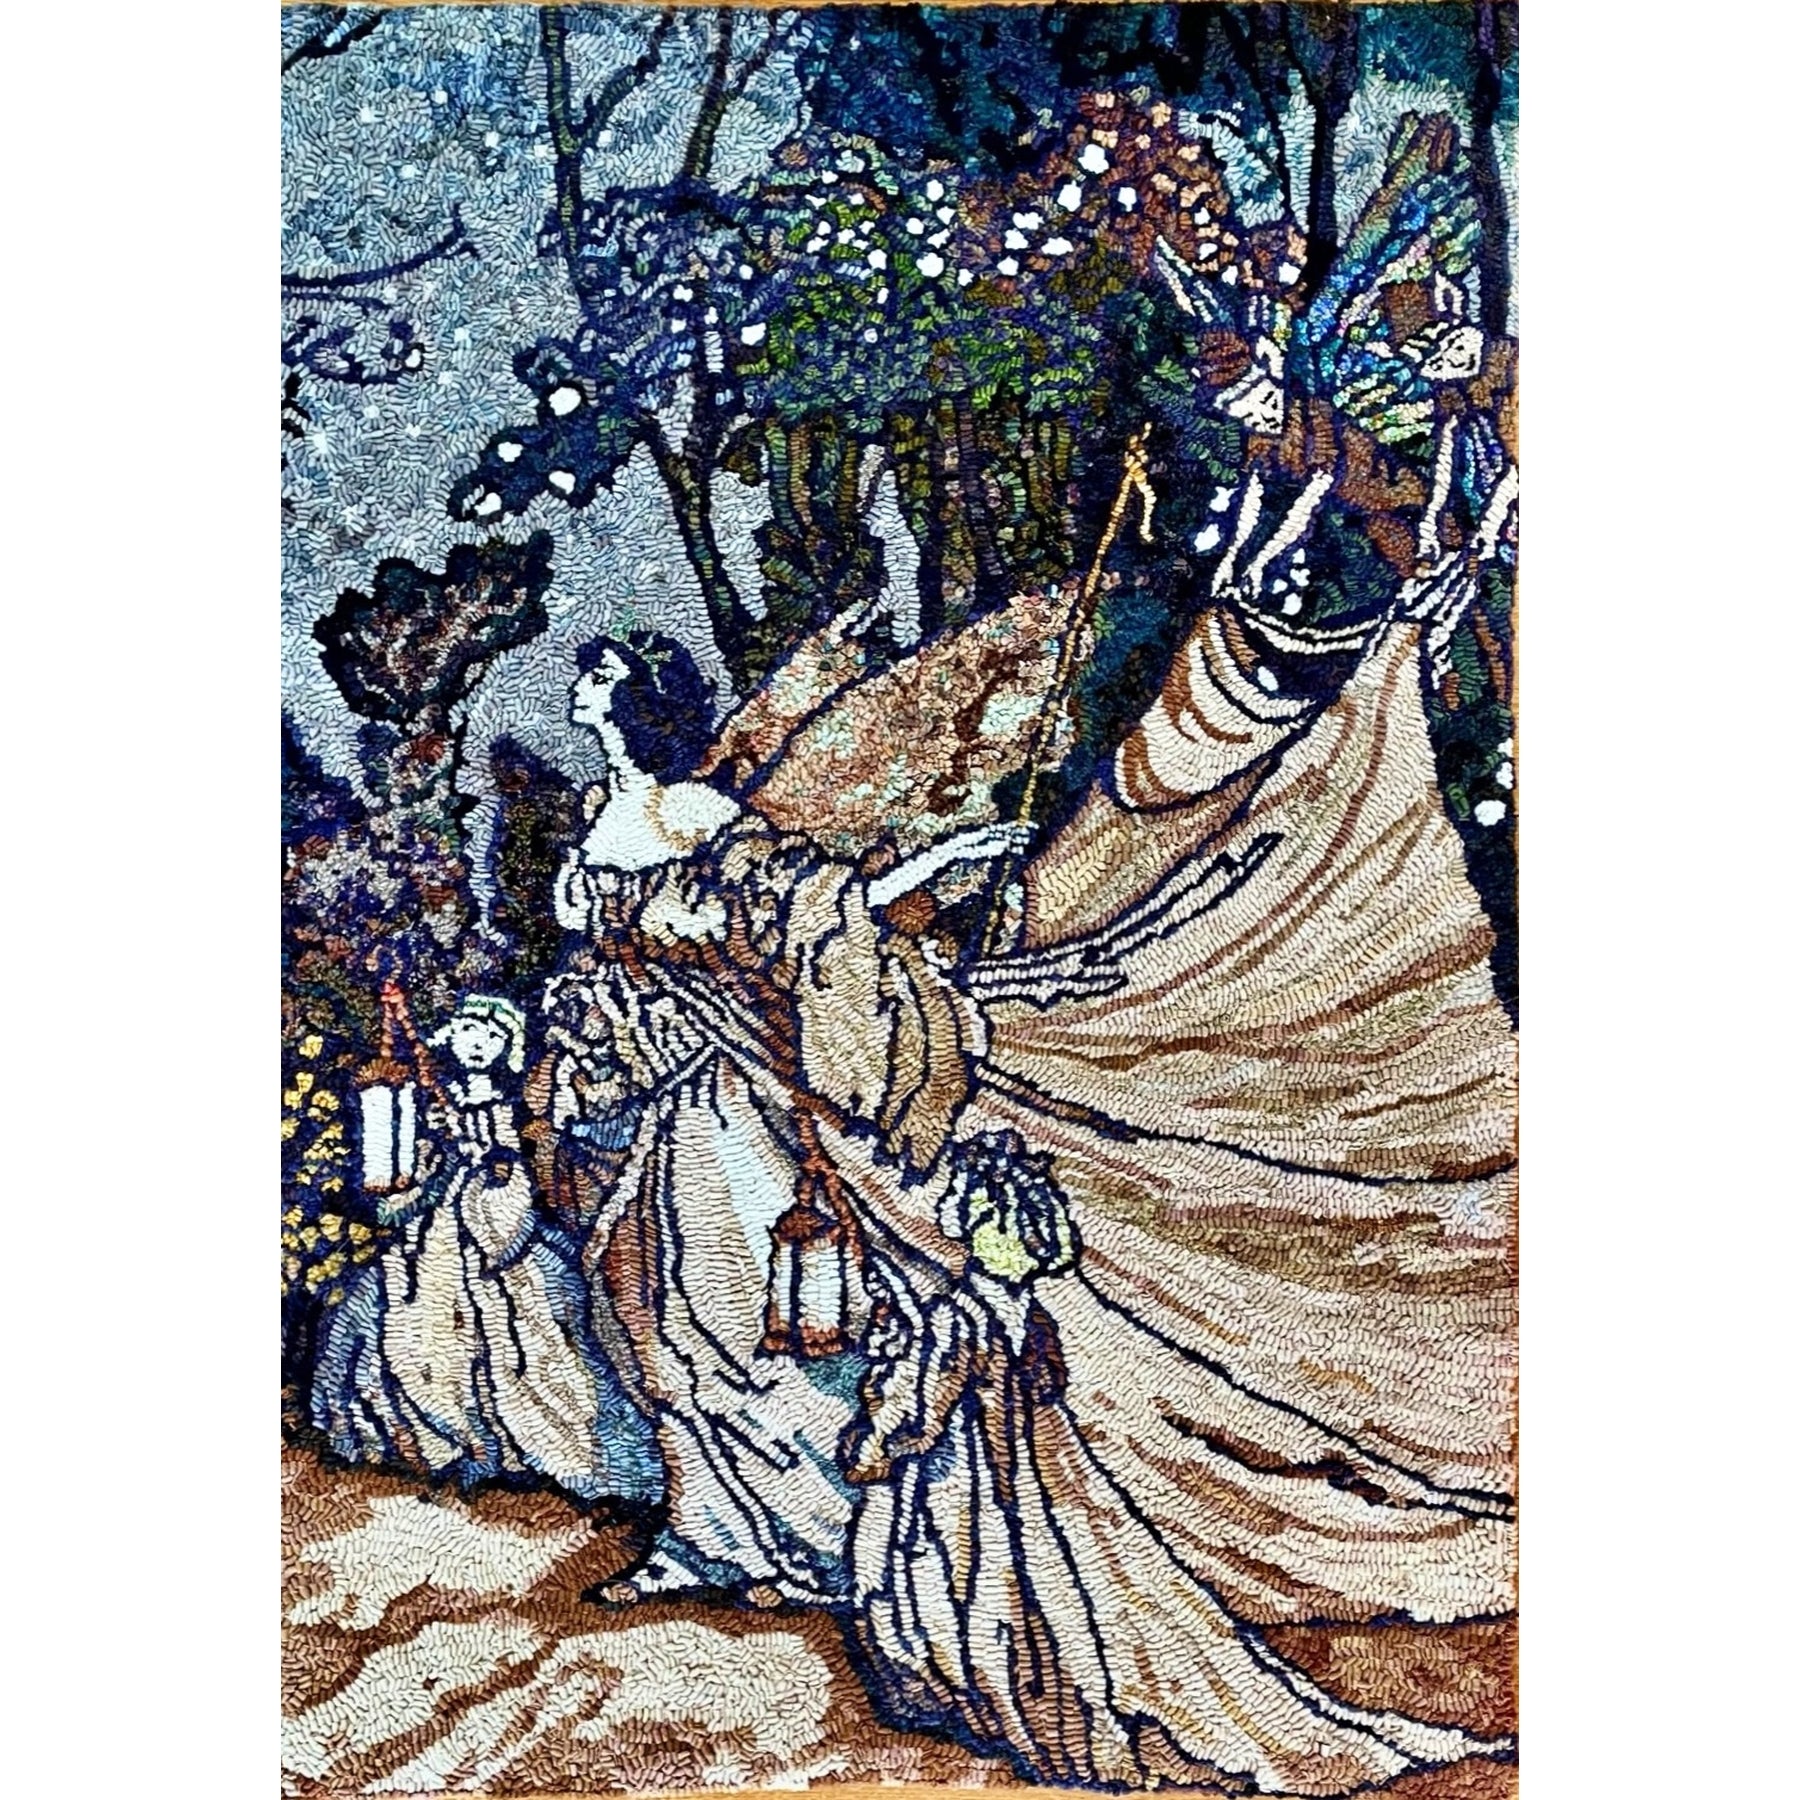 The meeting of Oberon and Titania, Queen of the Fairies, ill. Arthur Rackham, 1905, rug hooked by Juliana Kapusta